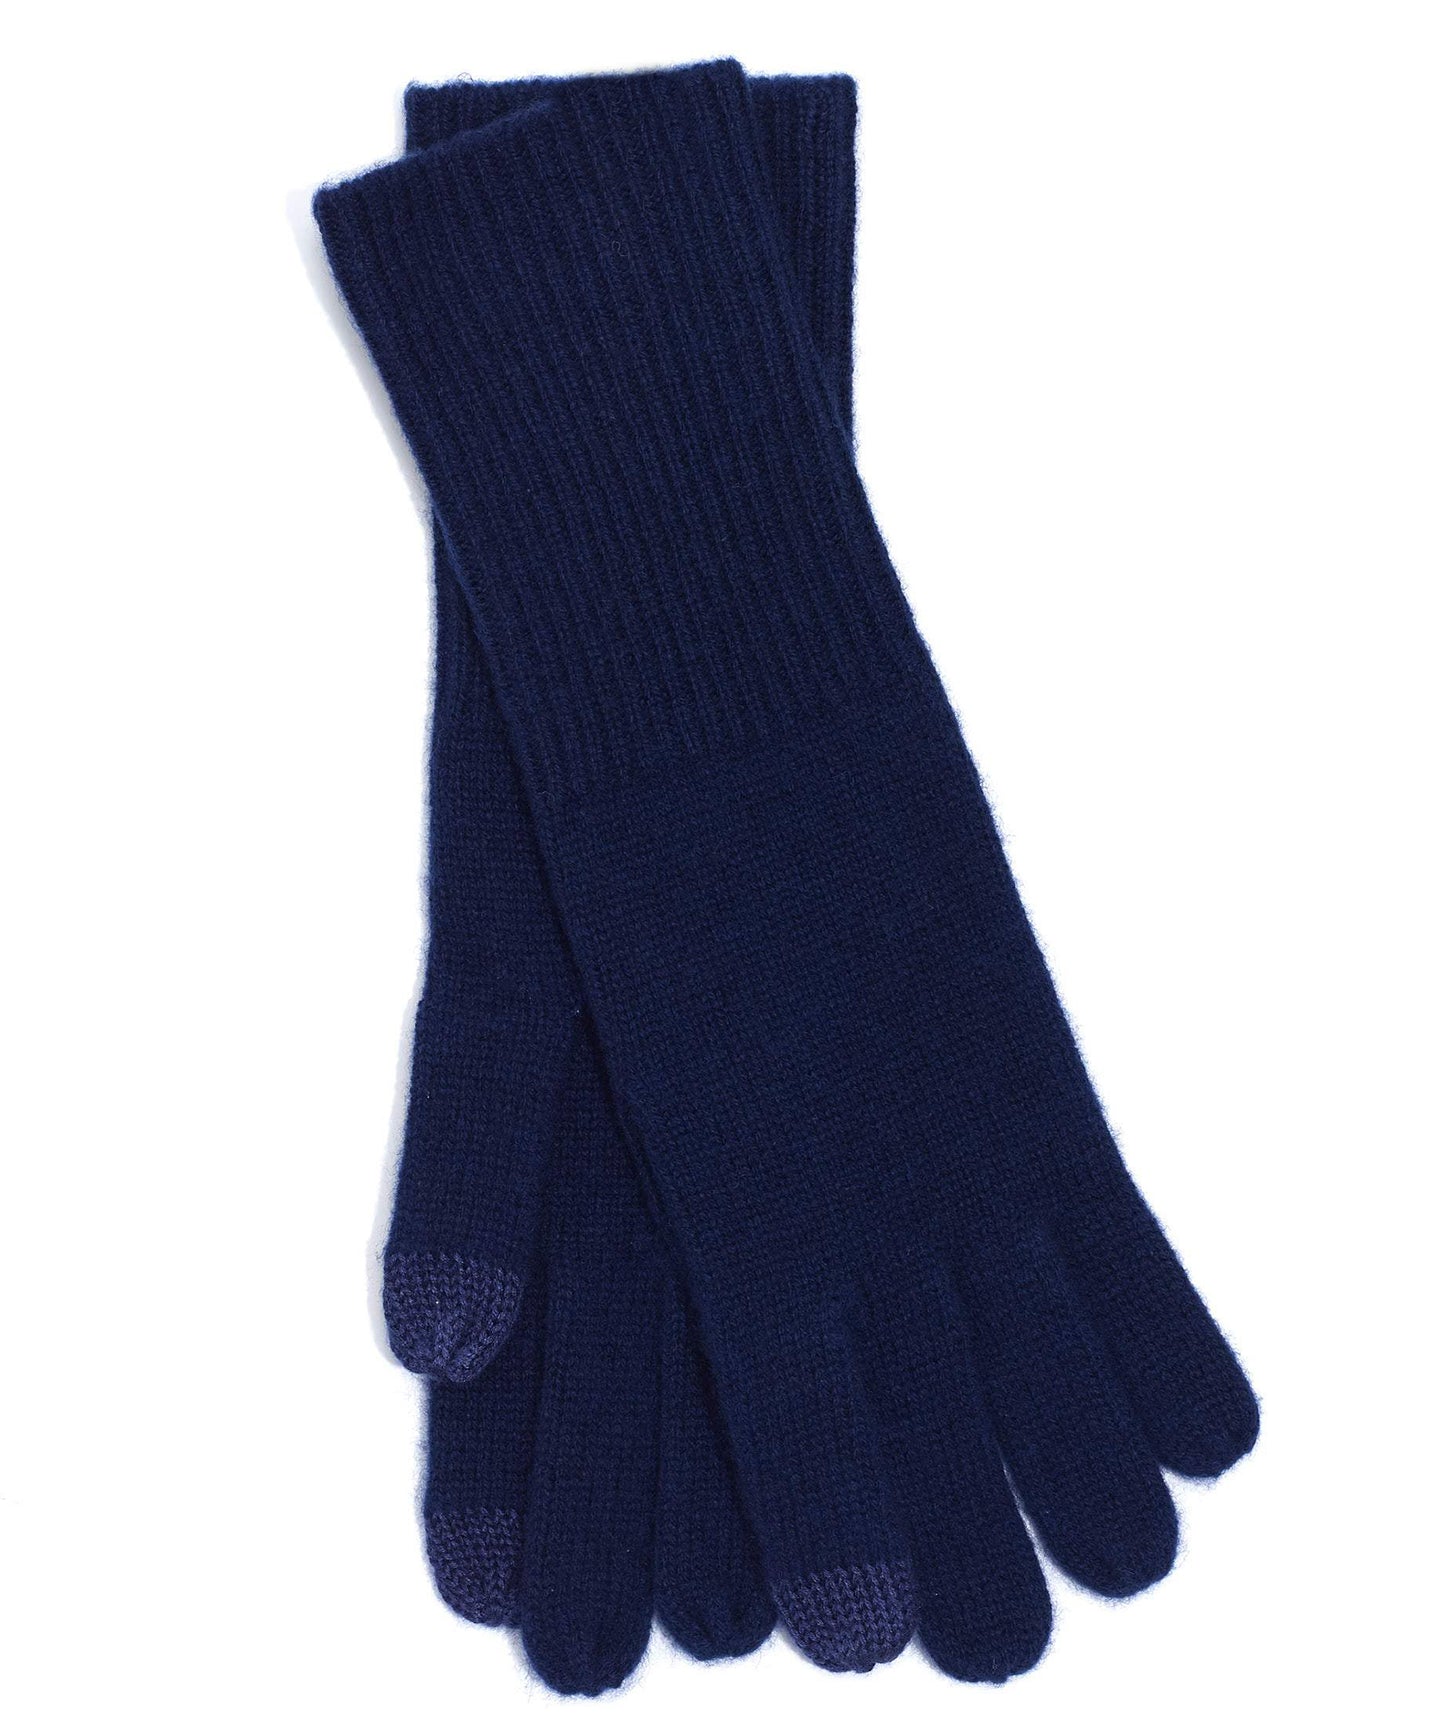 Wool/Cashmere  Gloves in color Navy